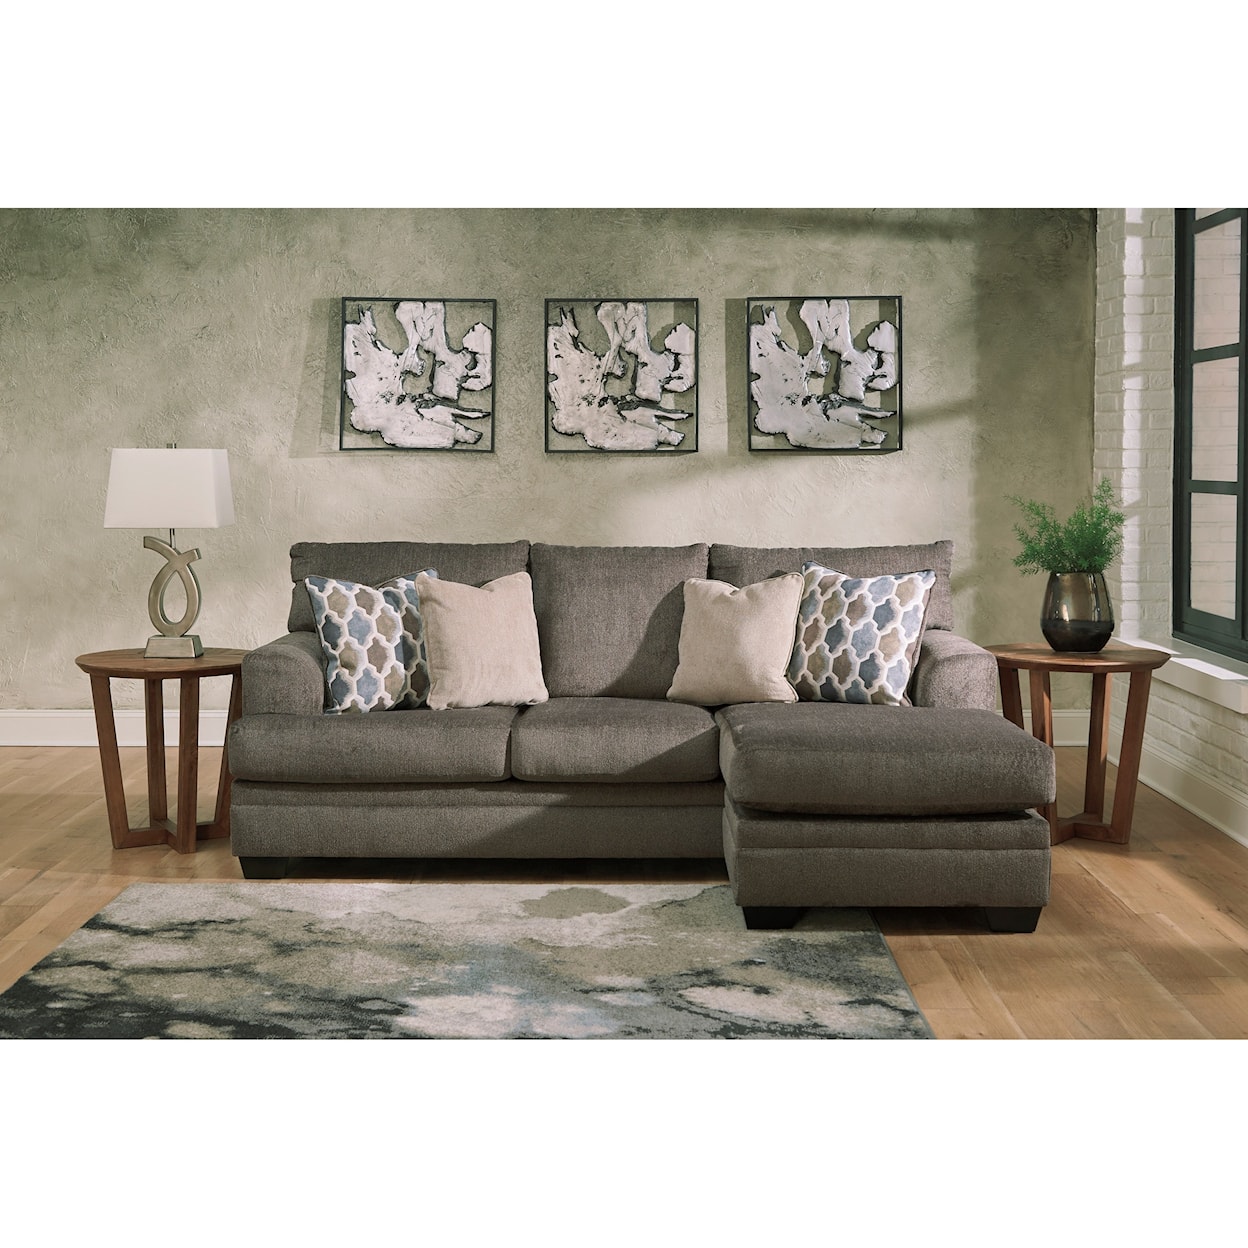 Signature Design by Ashley Dorsten Sofa with Chaise